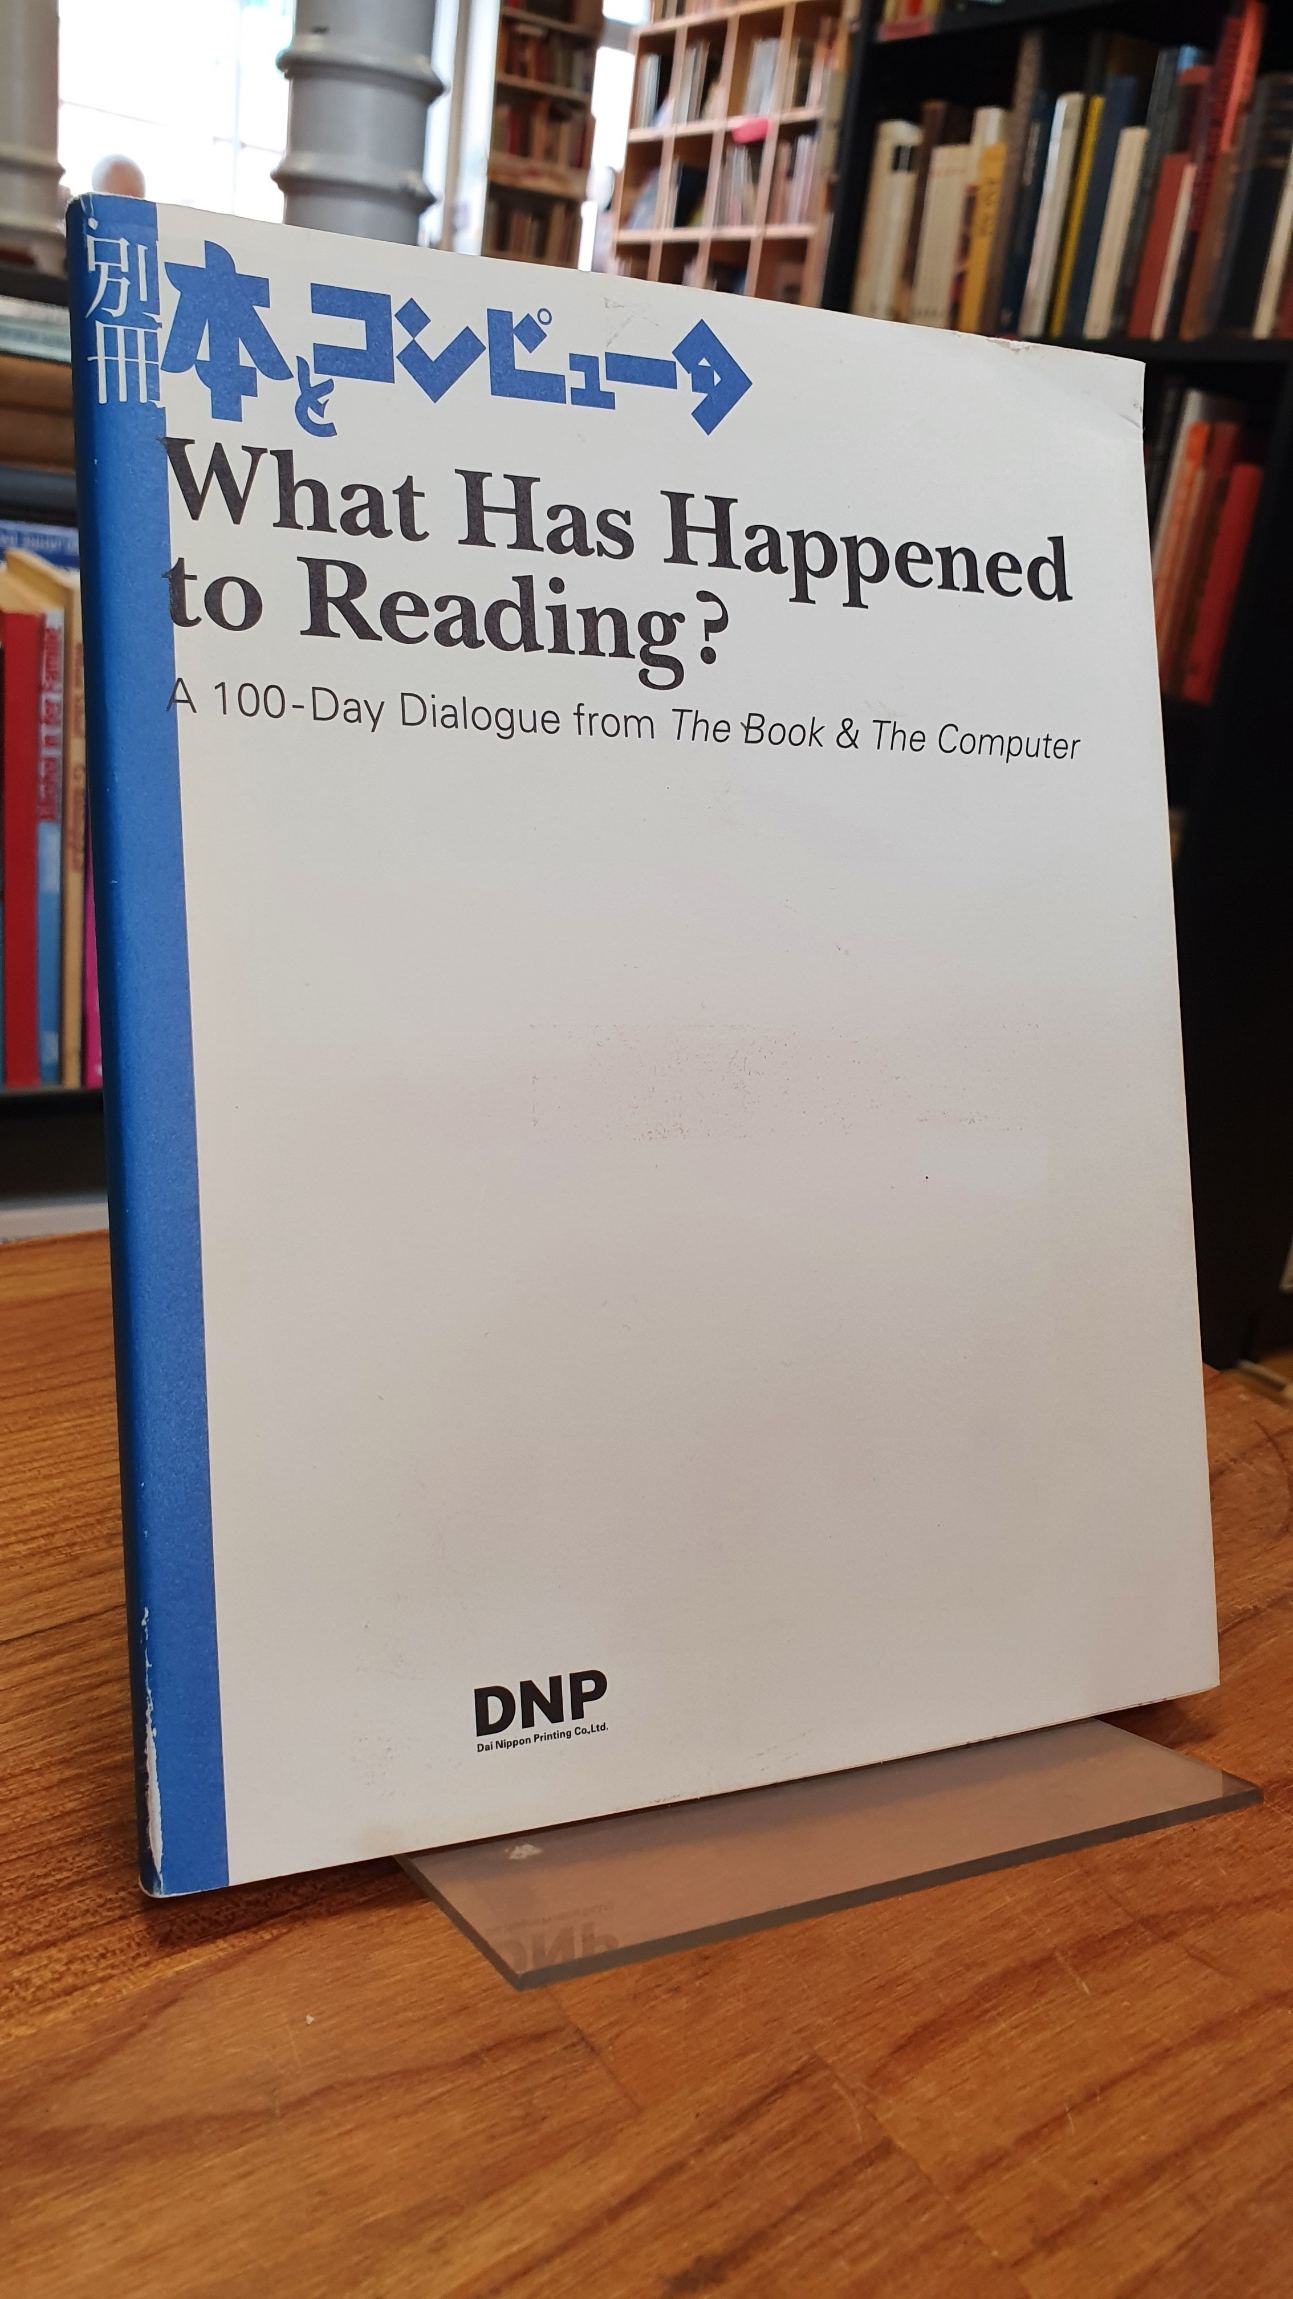 Kenji, What has Happened to Reading? A 100-Day Dialogue from The Book & The Comp